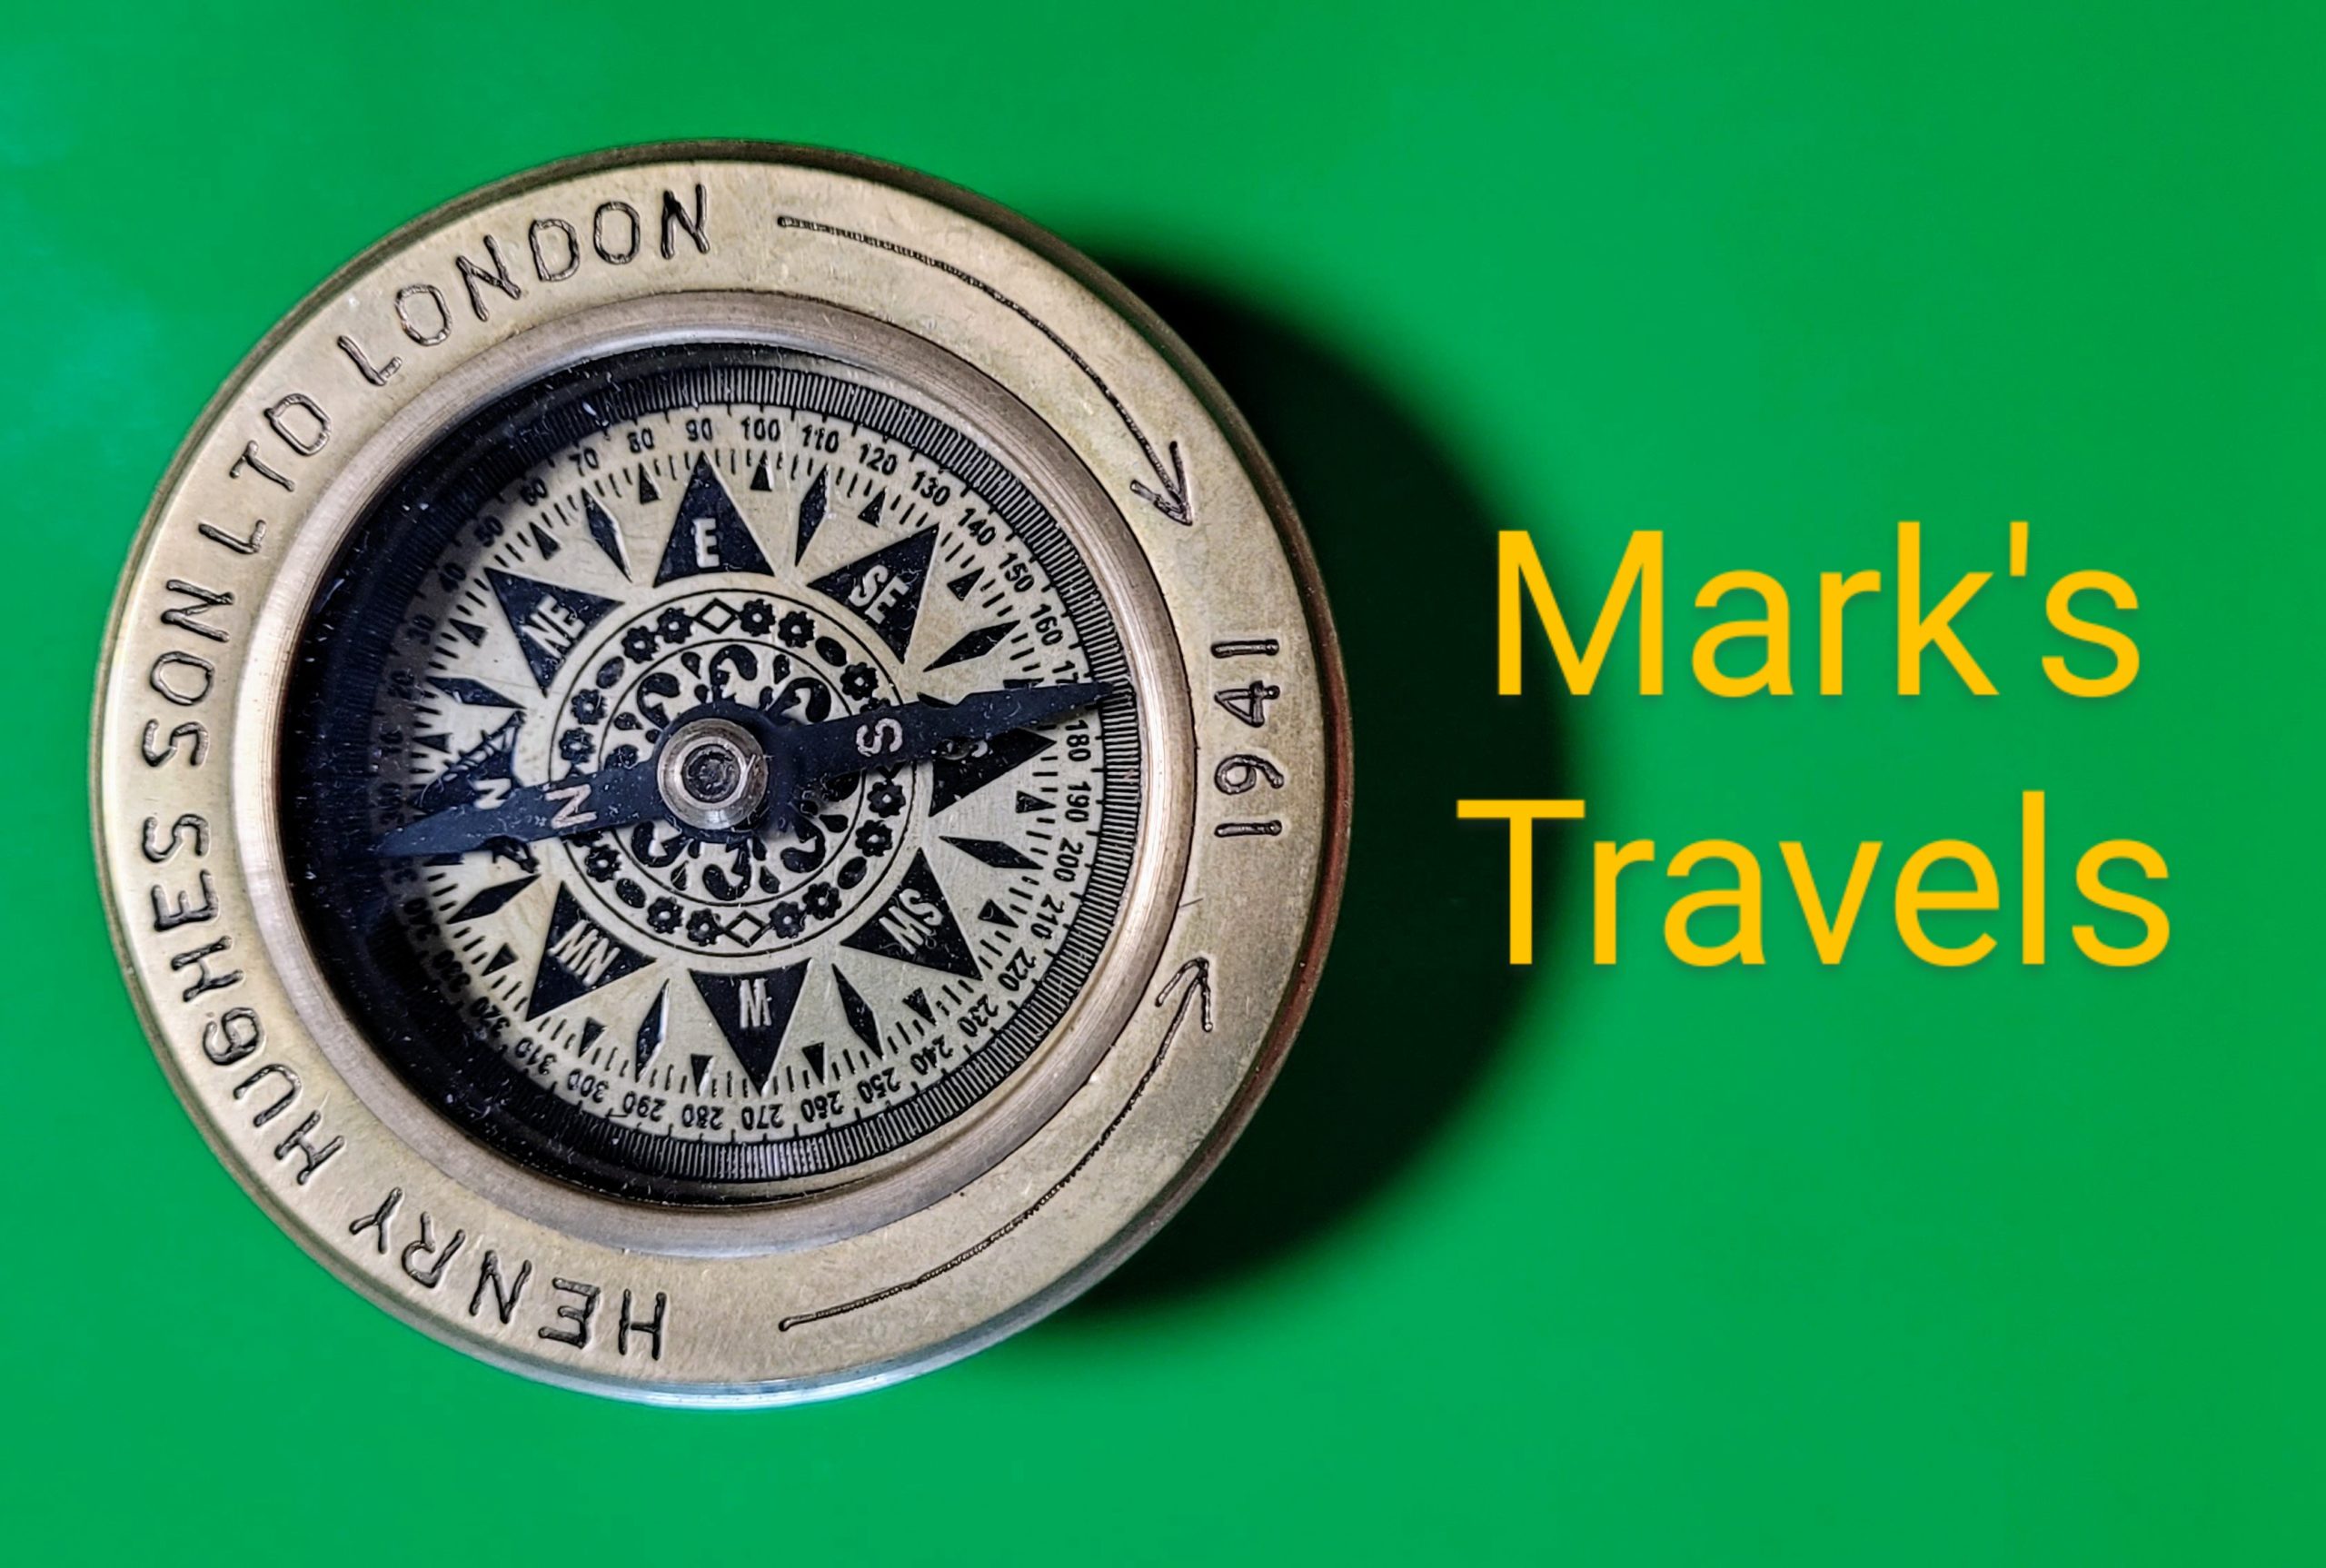 Antique compass with the words mark's travels